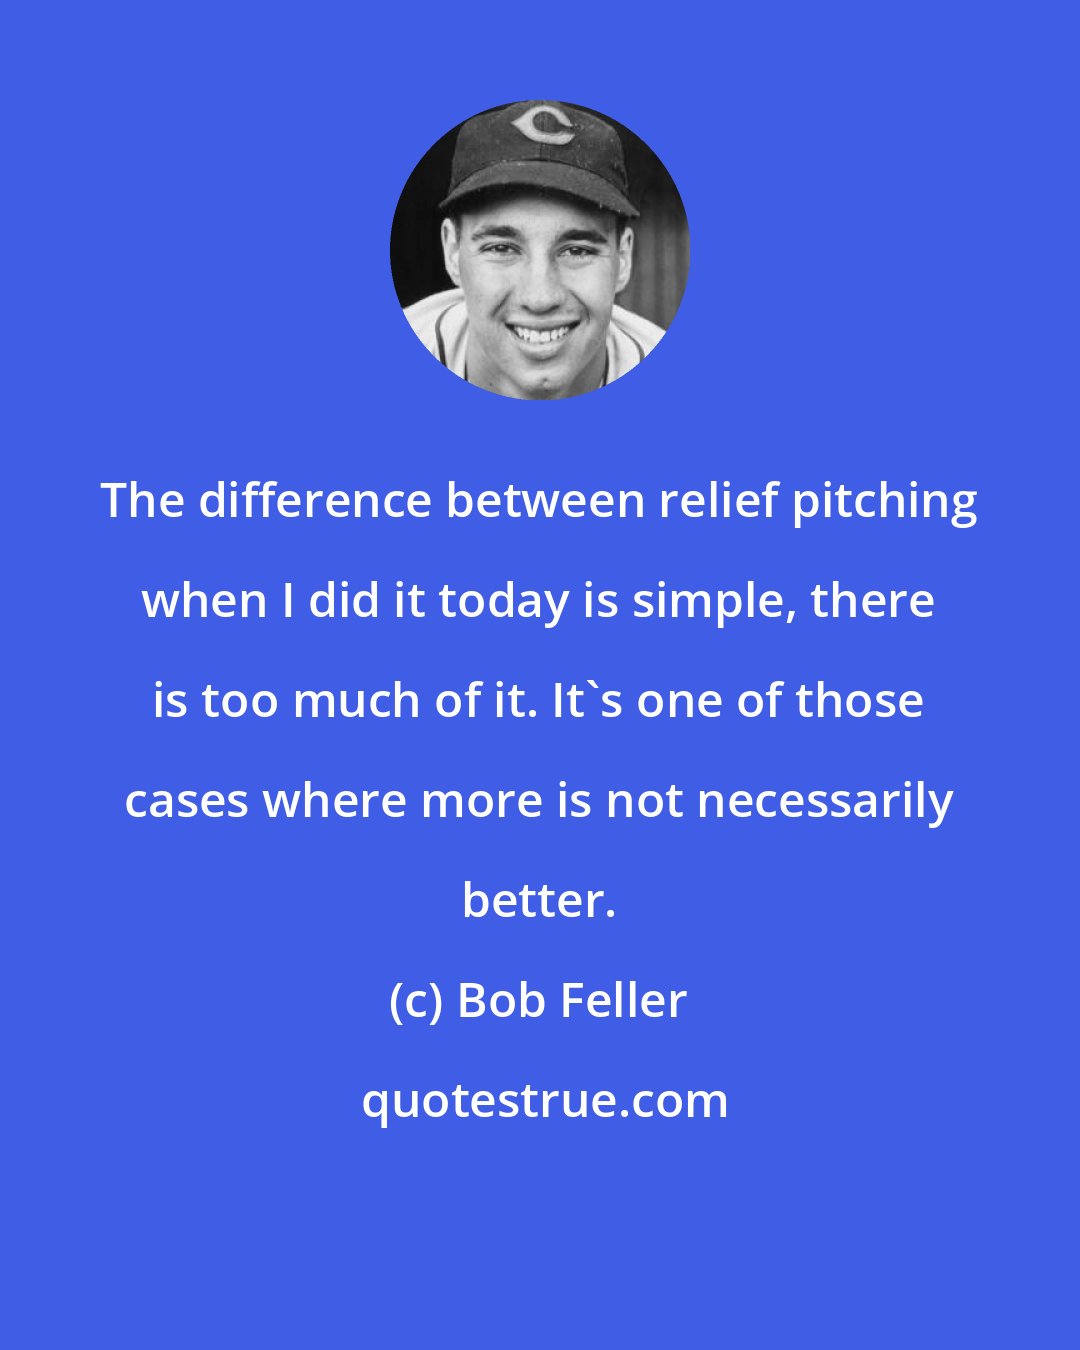 Bob Feller: The difference between relief pitching when I did it today is simple, there is too much of it. It's one of those cases where more is not necessarily better.